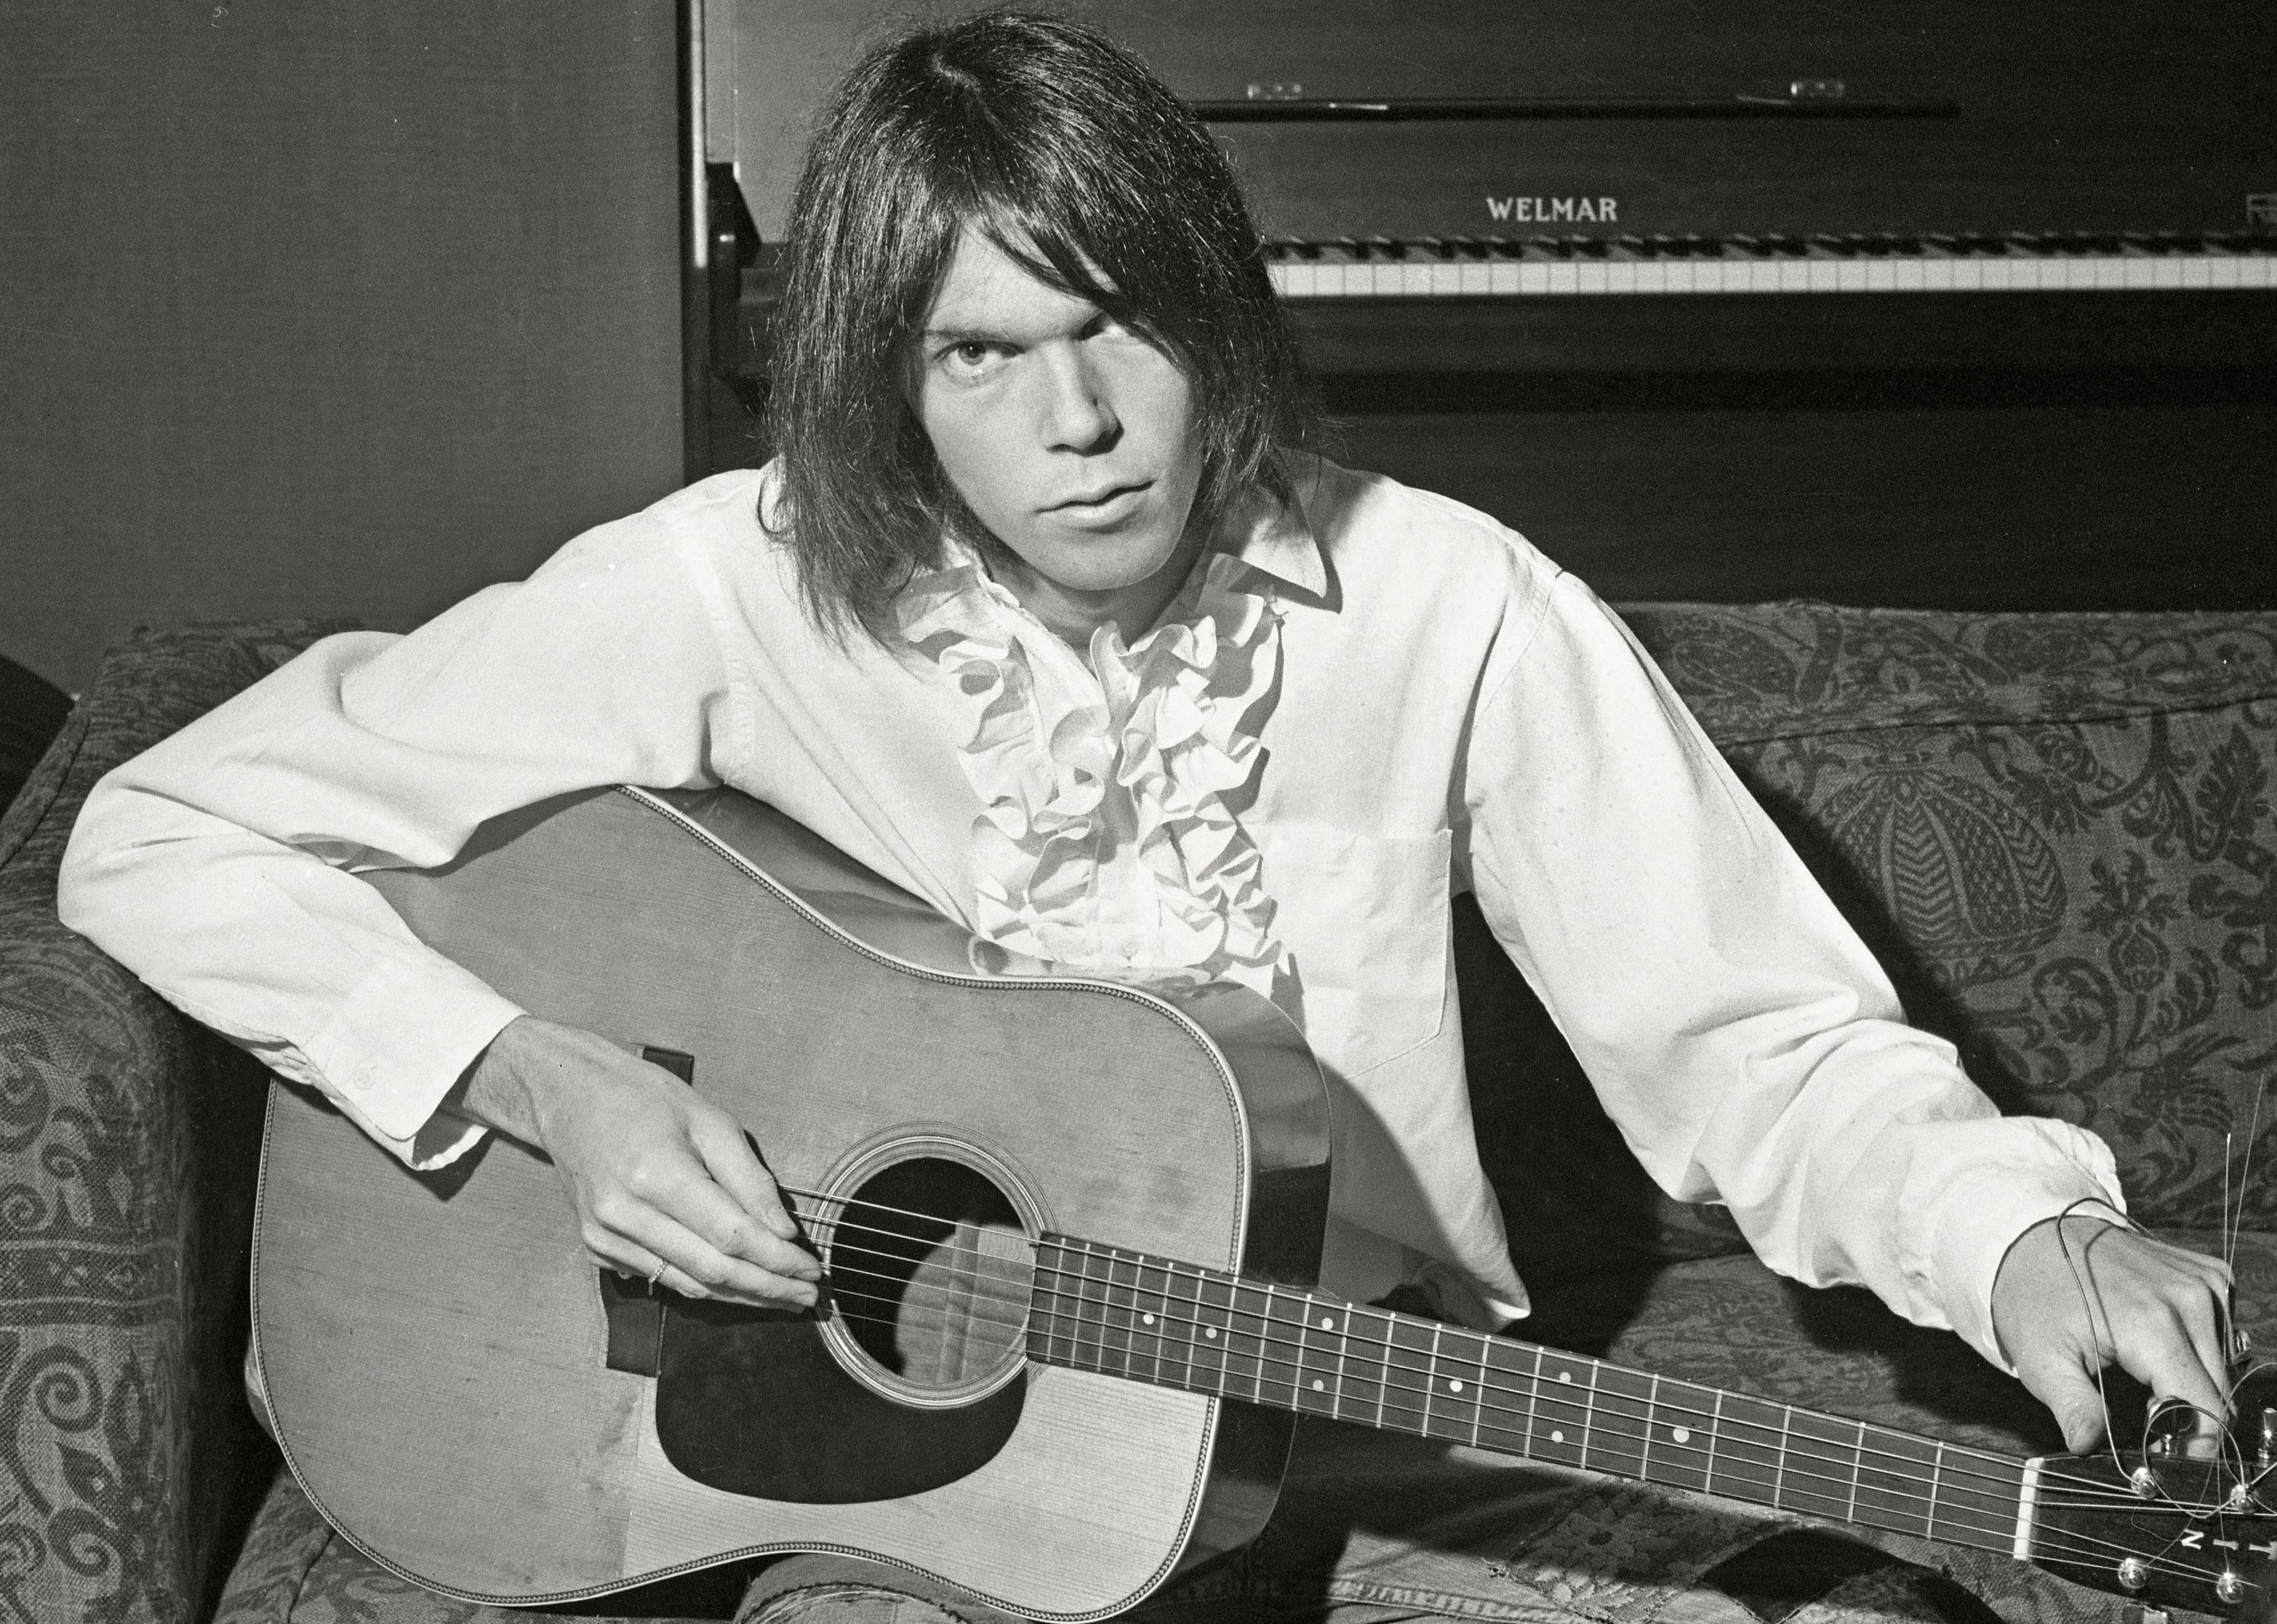 Neil Young holding a guitar on a couch.